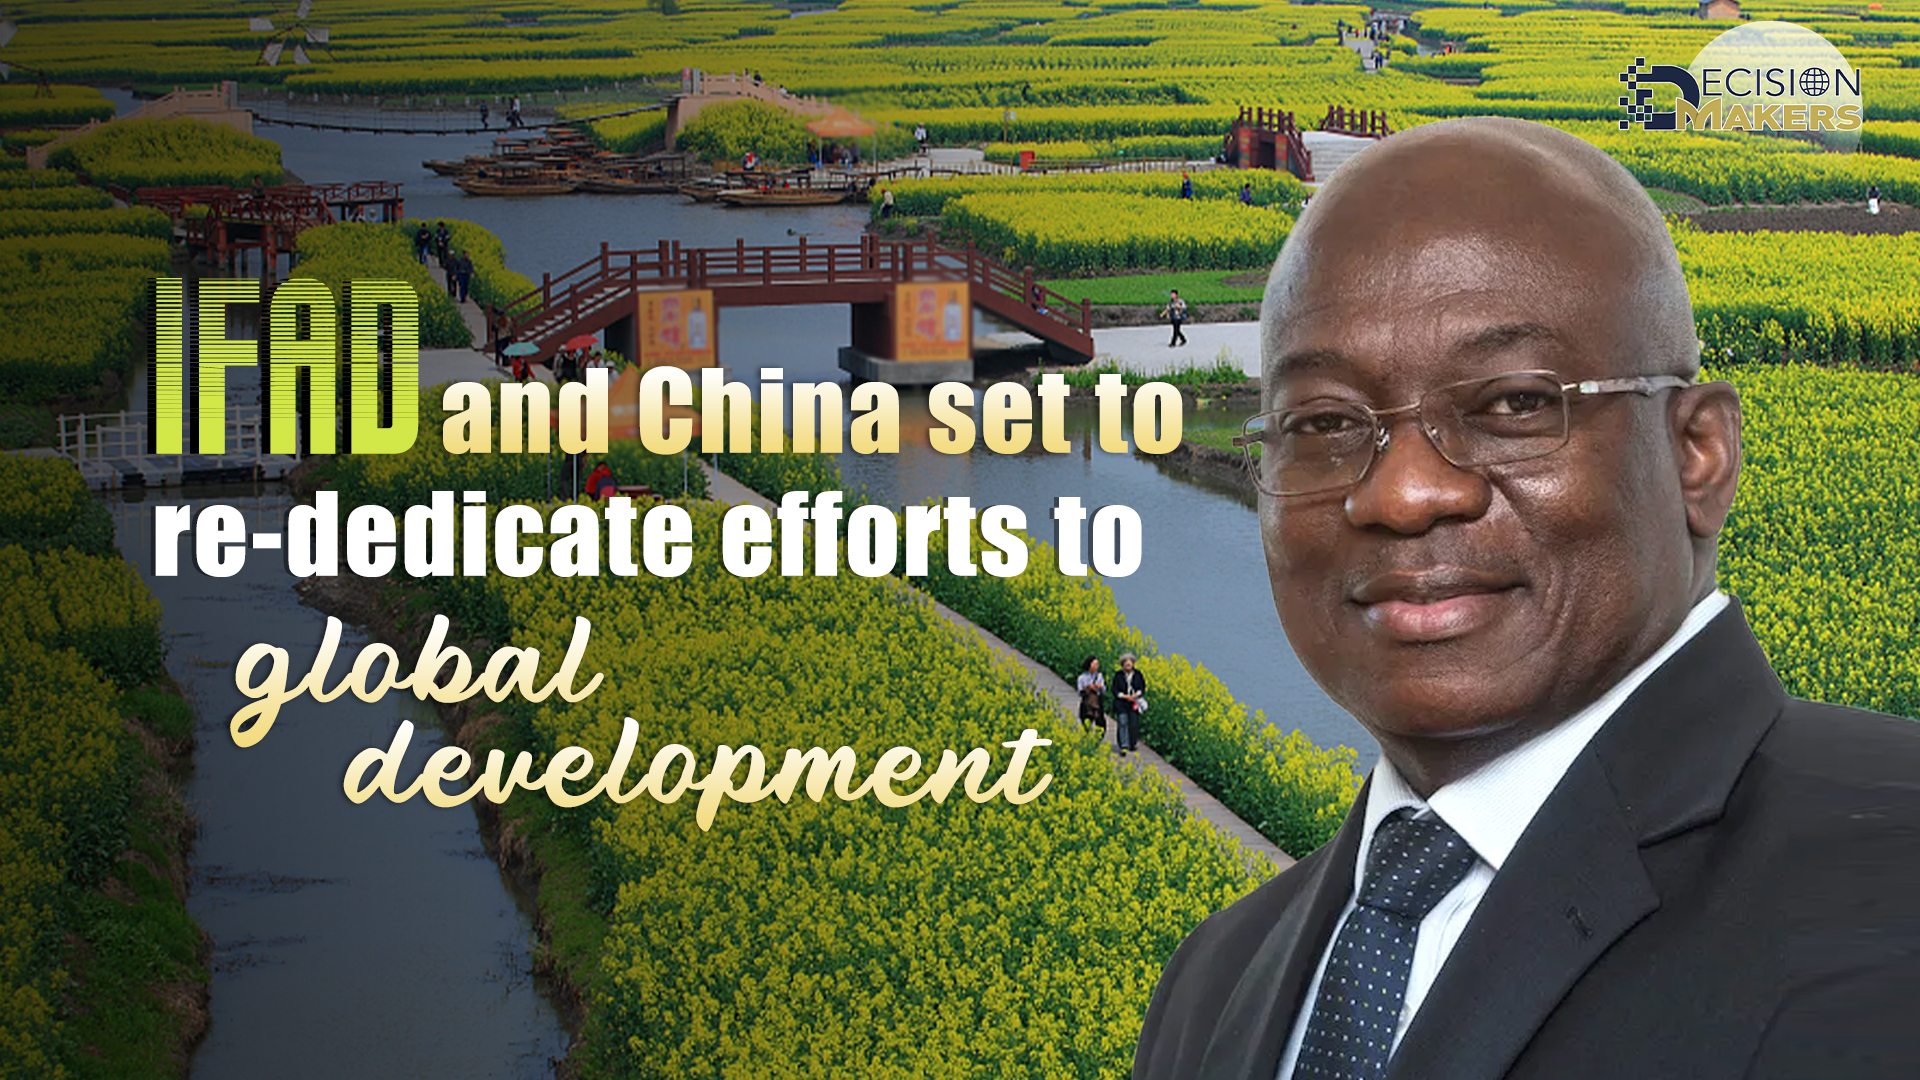 IFAD and China set to re-dedicate efforts to global development